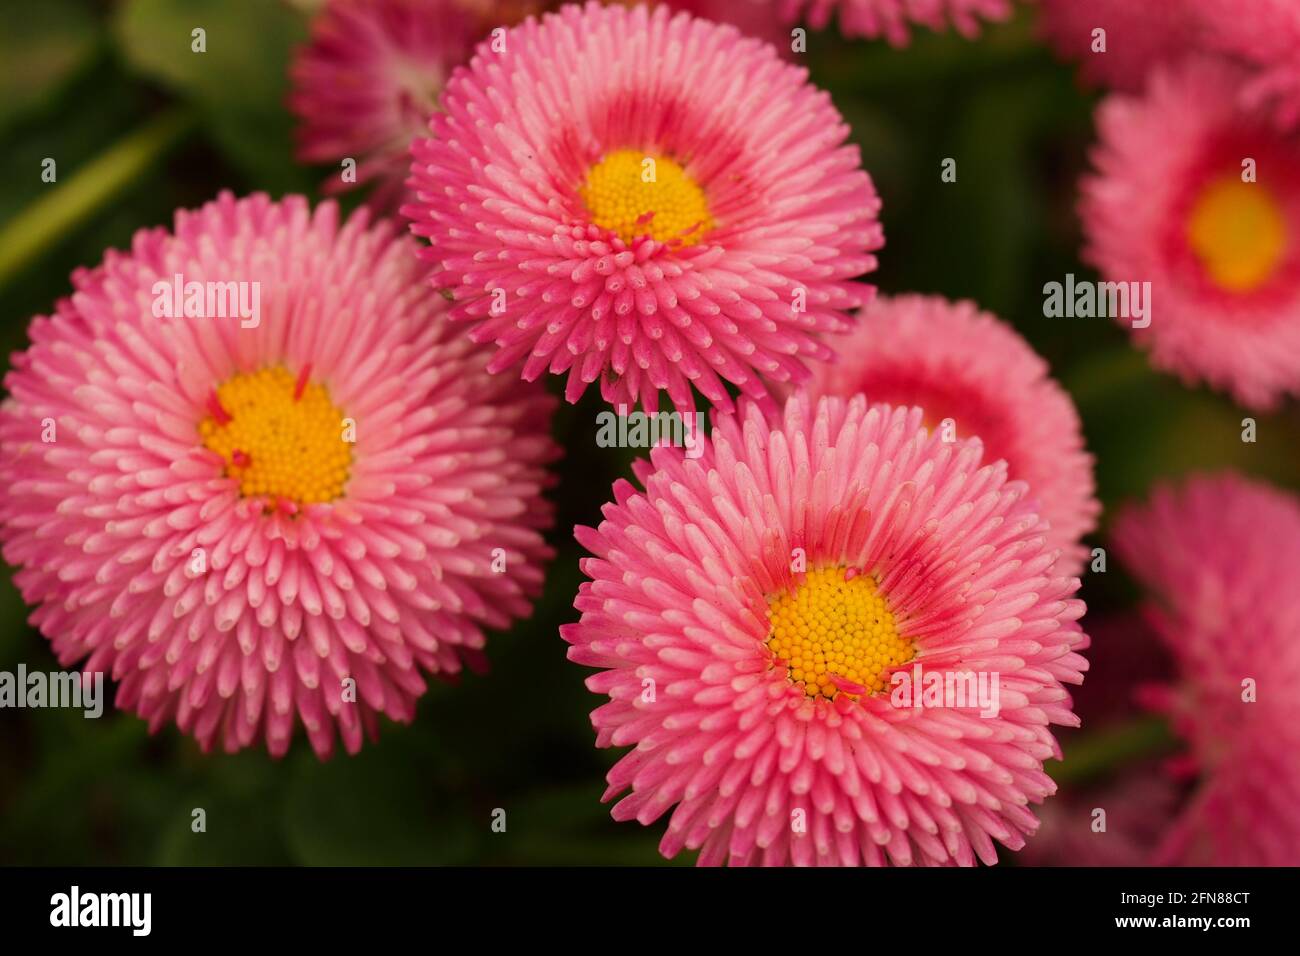 A close up of a group of Pink English Daisy Pom Pom flowers Stock Photo